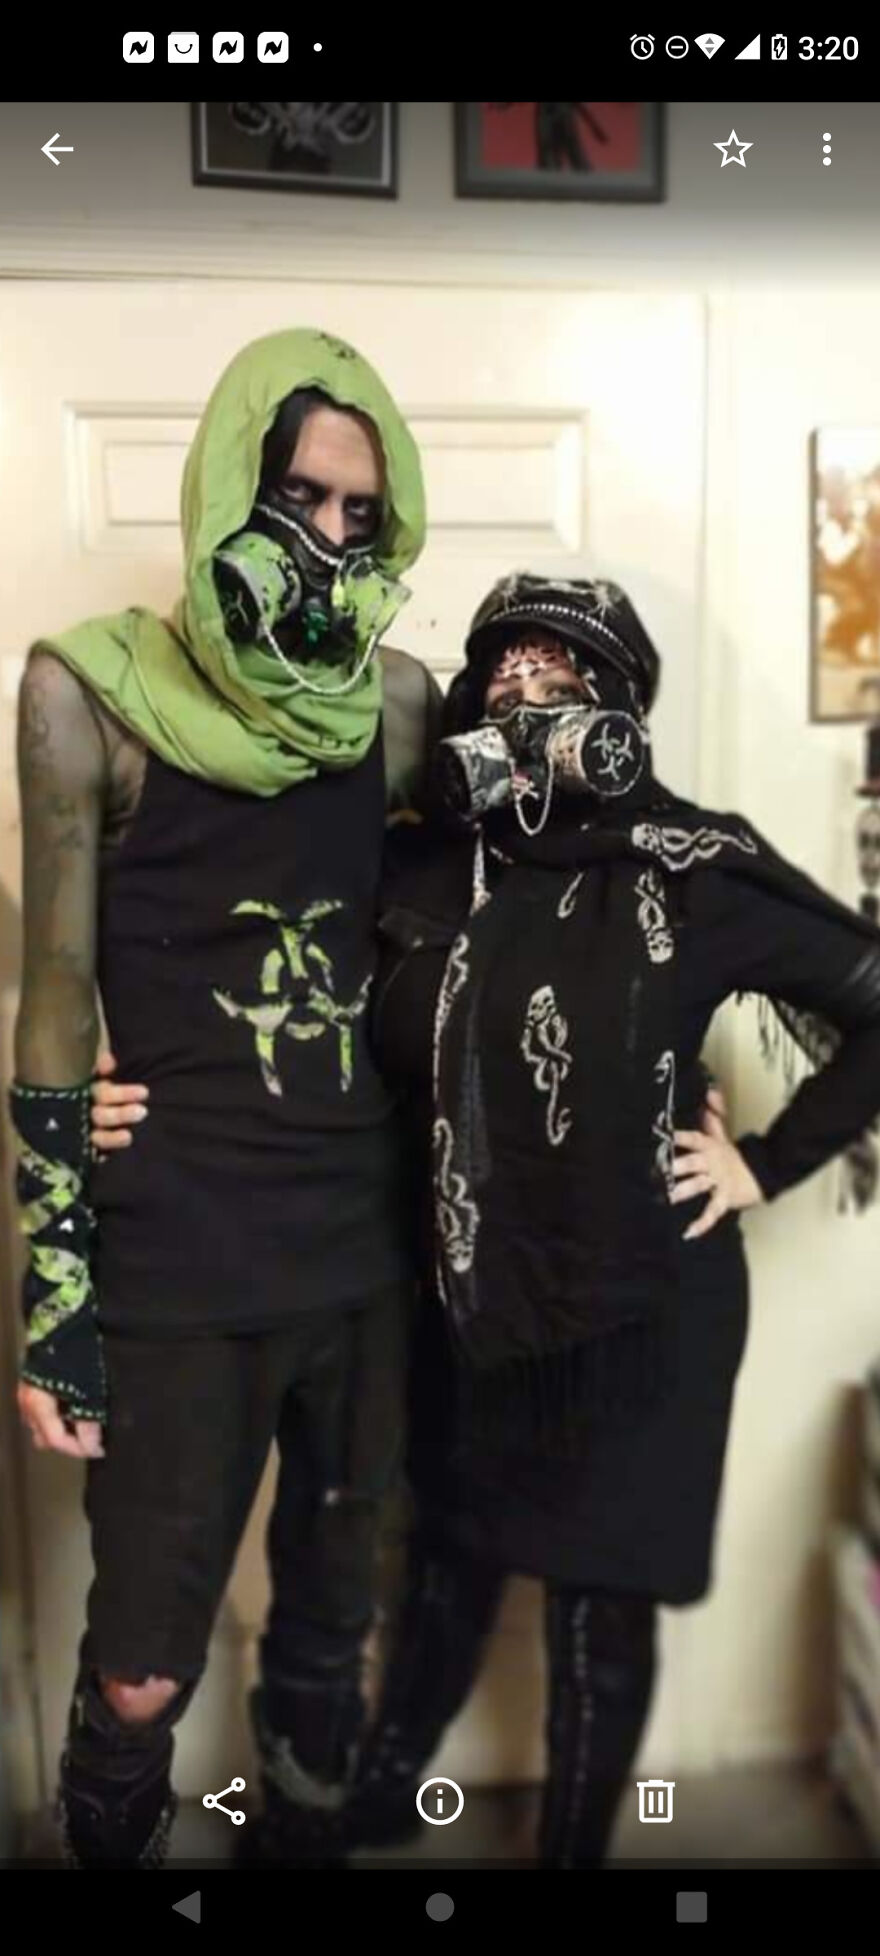 My Creativity And Quick Thinking. Decided To Go To The Apocalypse Ball Last Minute Husband Said No Way We Could Get Costumes In One Day. Quick Trip To Goodwill And A Few Hours Of Crafting And We Won The Costume Contest